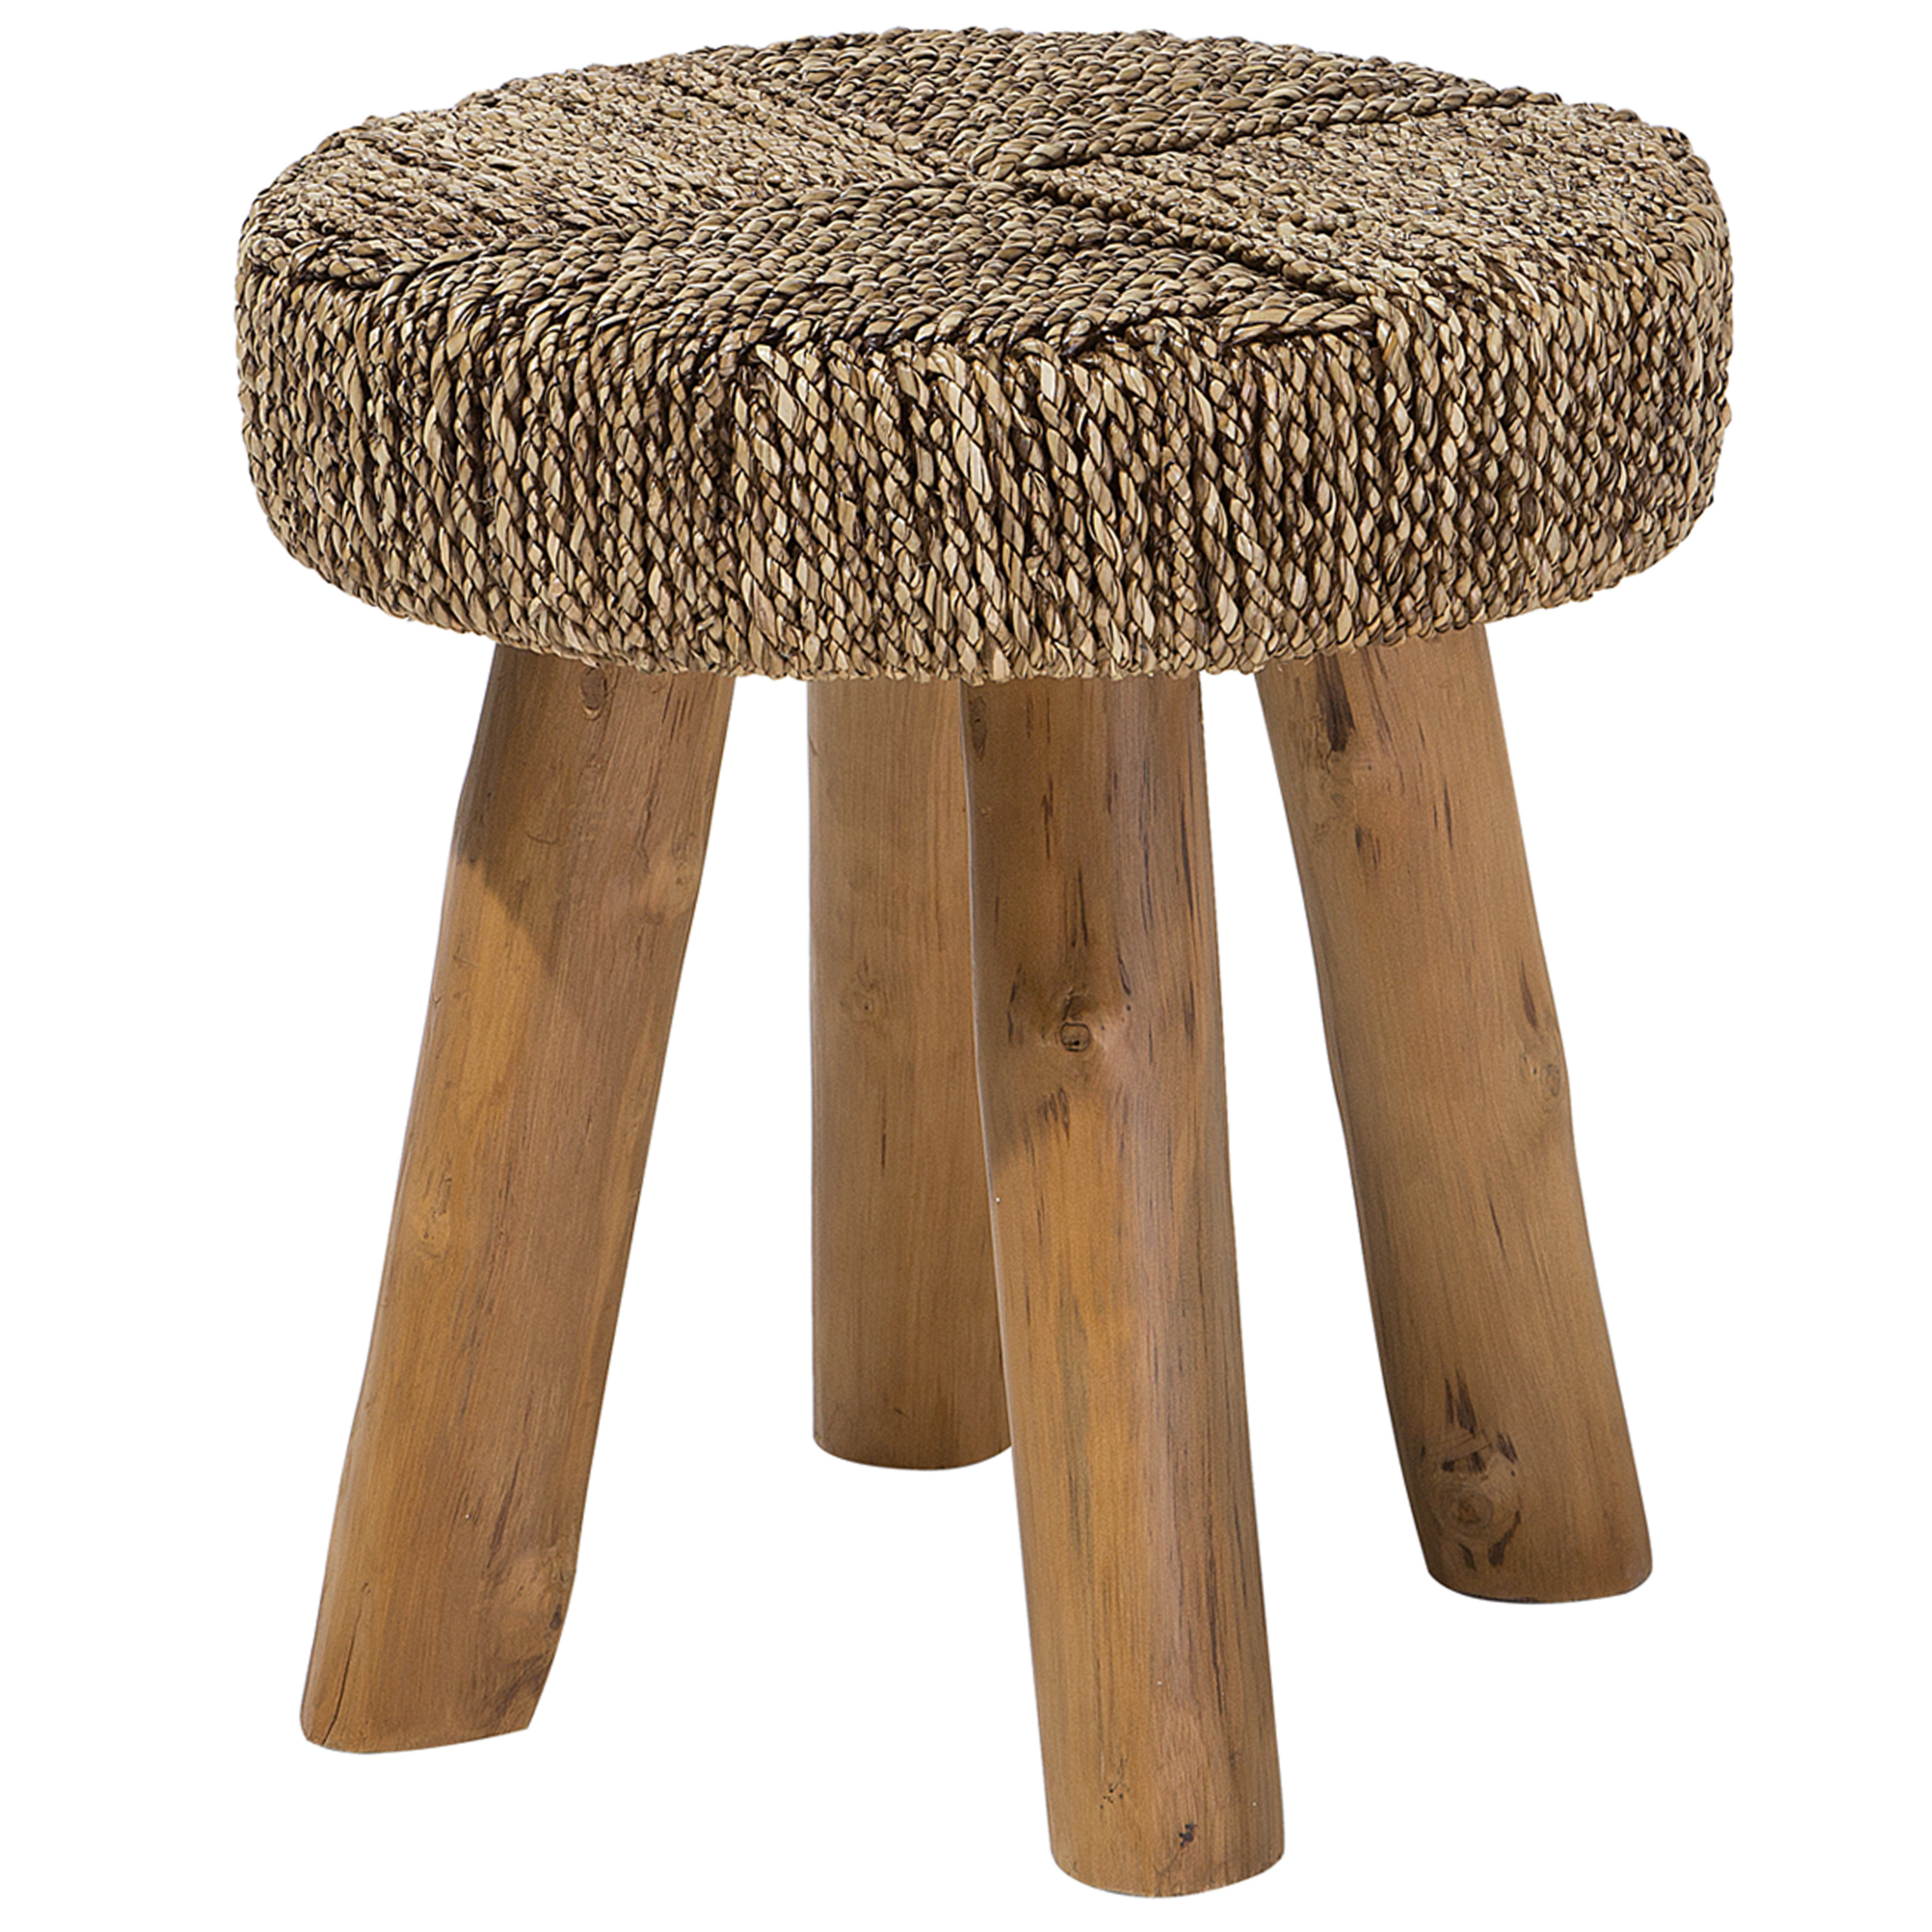 Beliani Side Table Light Wood Teak with Seagrass Footstool Rustic Raw Style